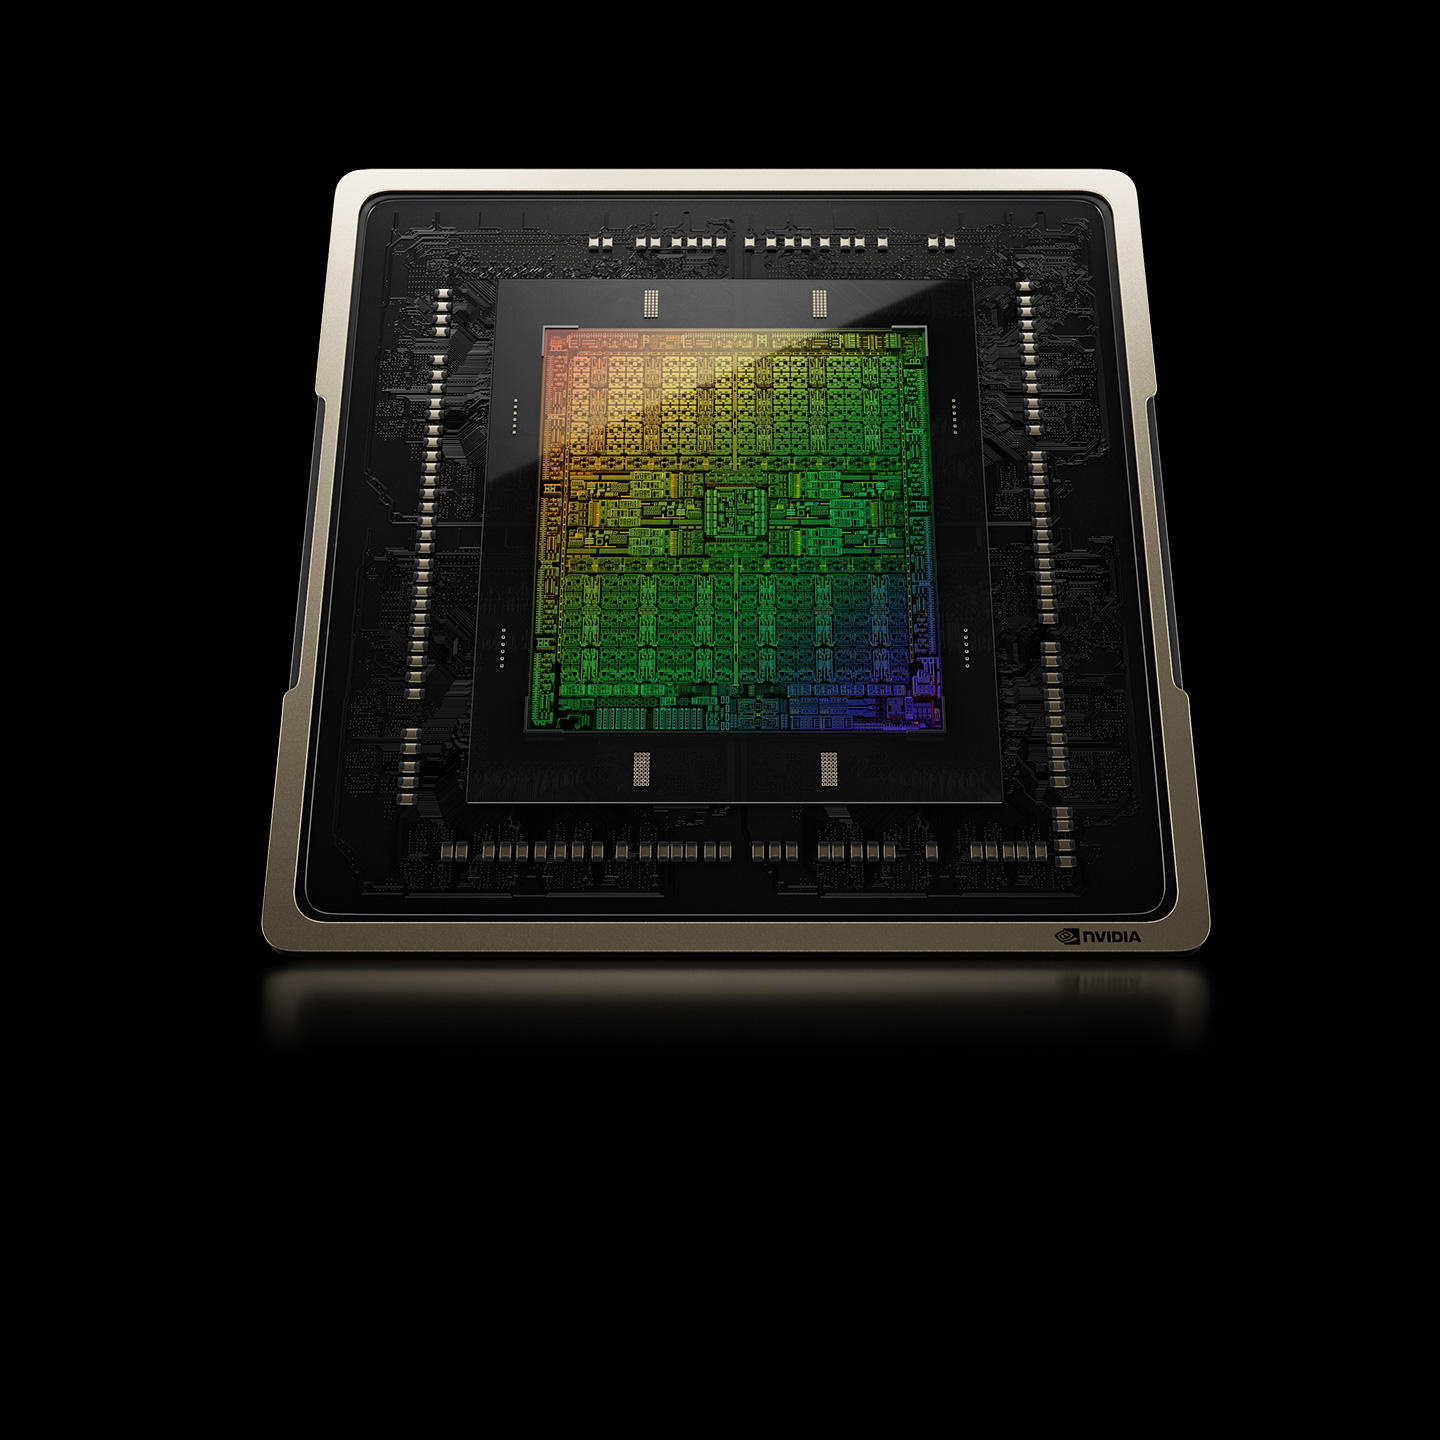 NVIDIA - Introducing the NVIDIA Ada Lovelace architecture powering #NVIDIAGeForce RTX 40 Series GPUs